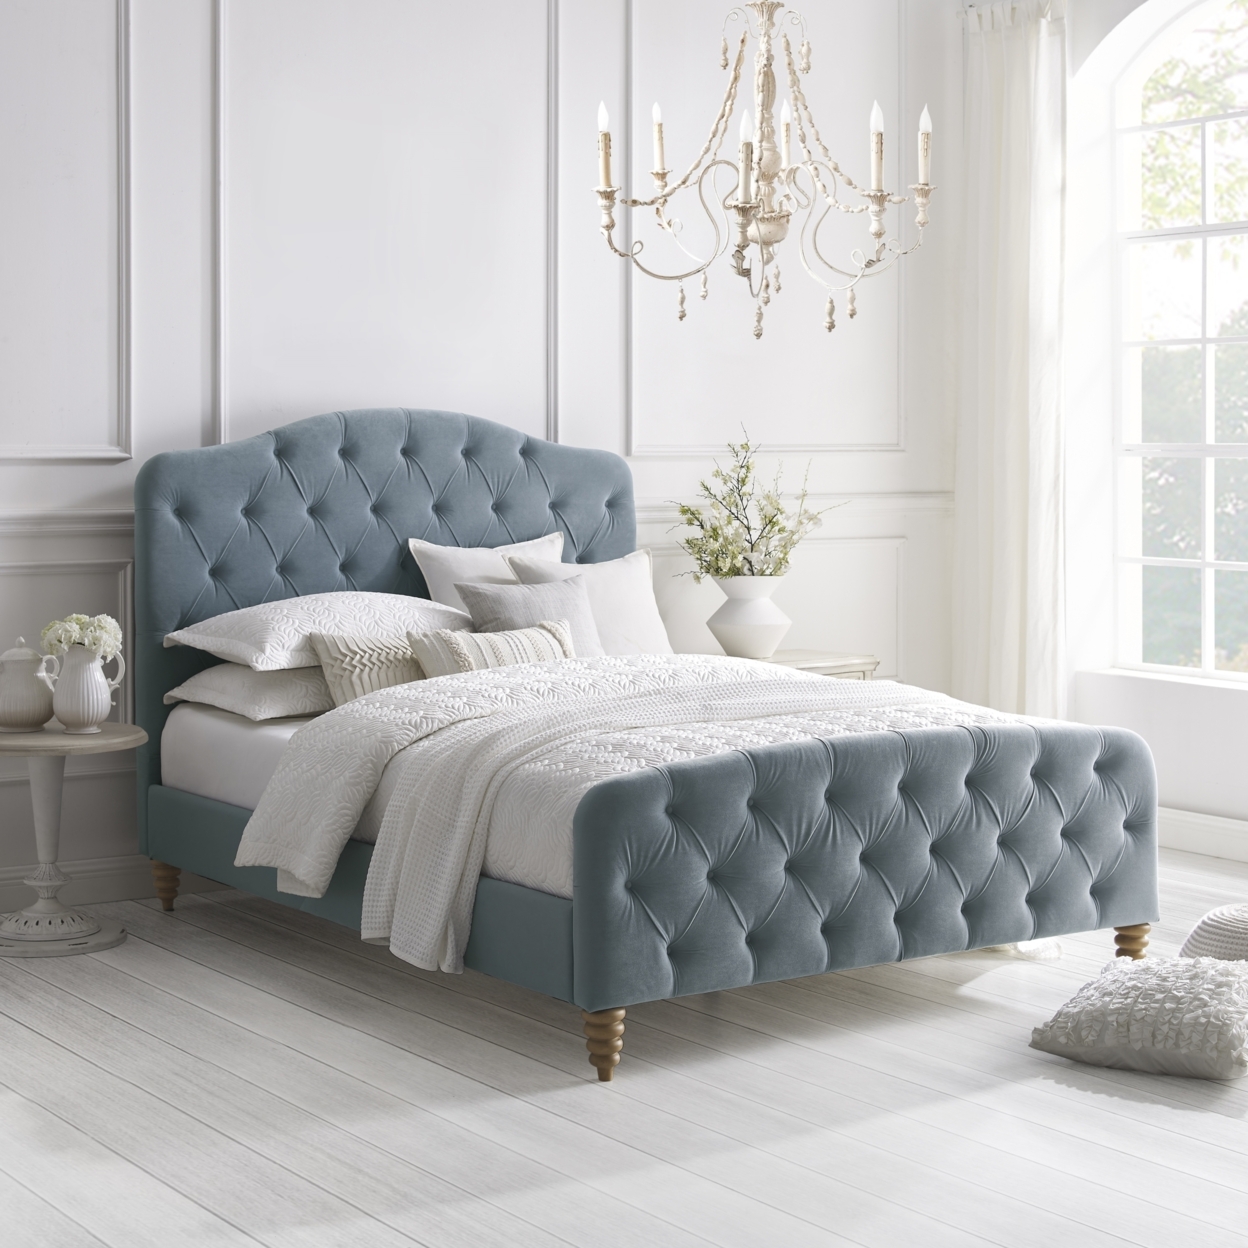 Adilene Bed-Diamond Tufted Headboard And Footboard-Upholstered-Slats Included - Light Blue, Queen